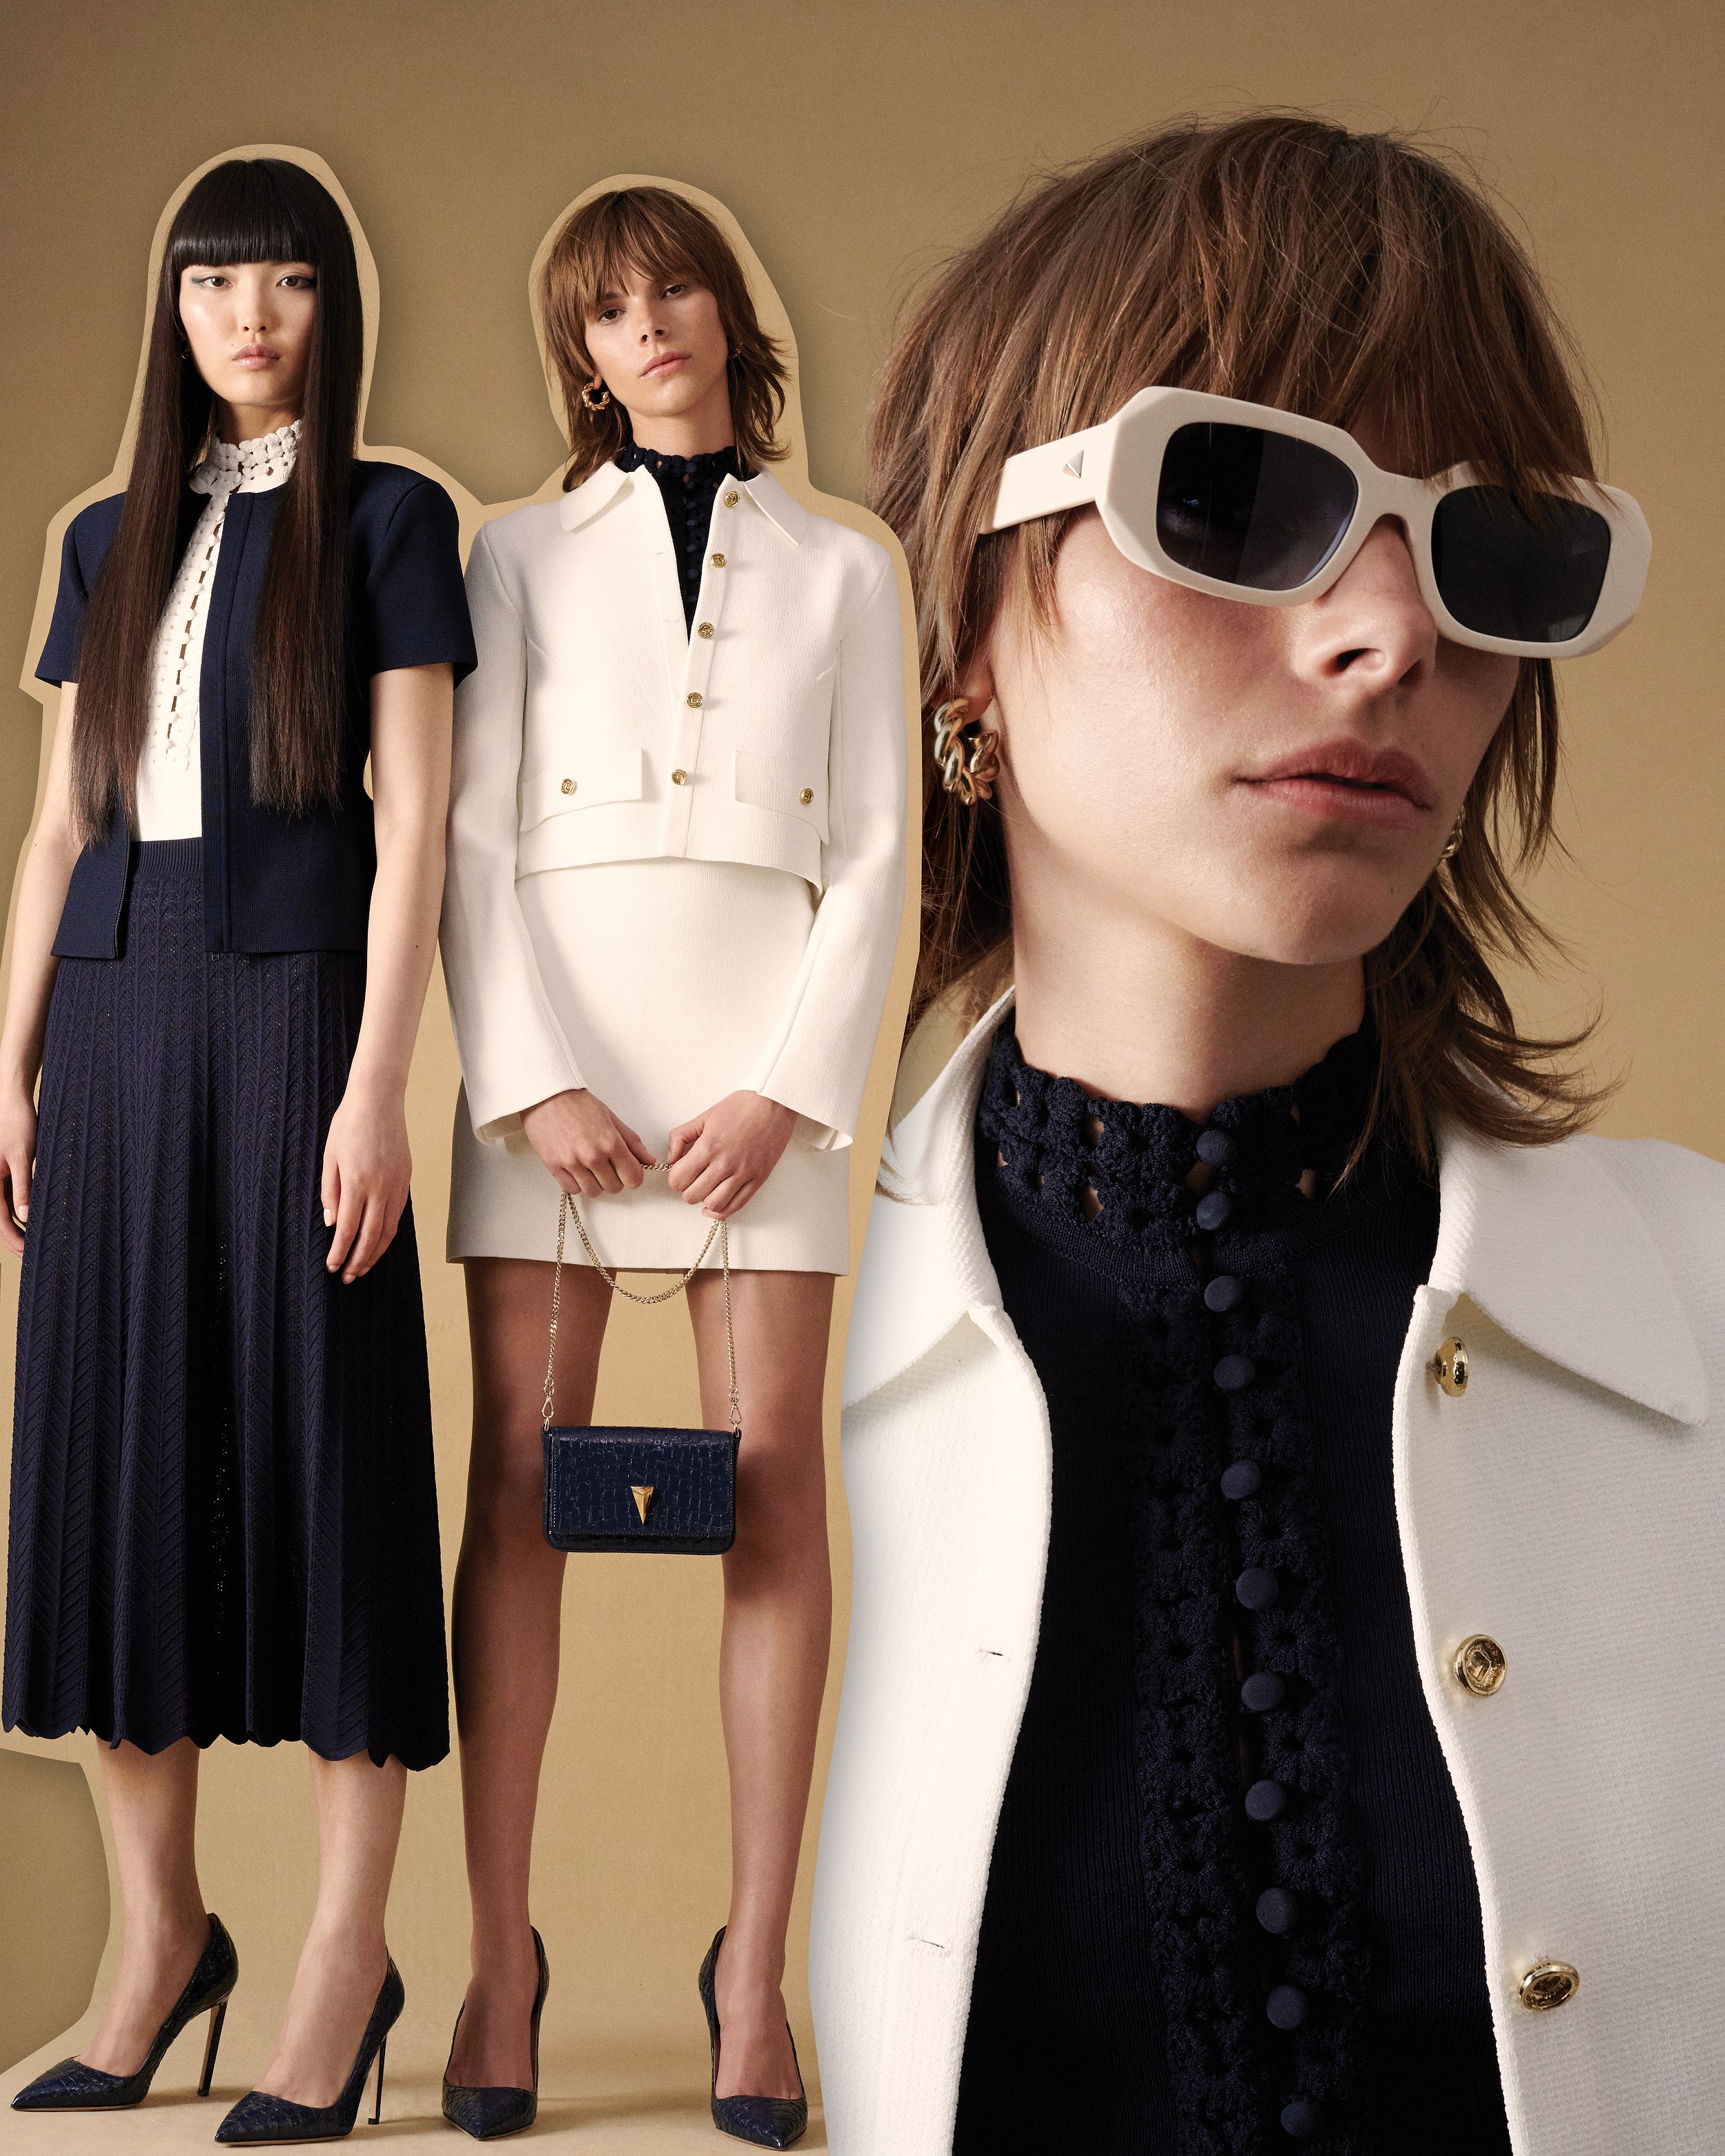 Collage of three models wearing Crepe Knit clothing in white and navy